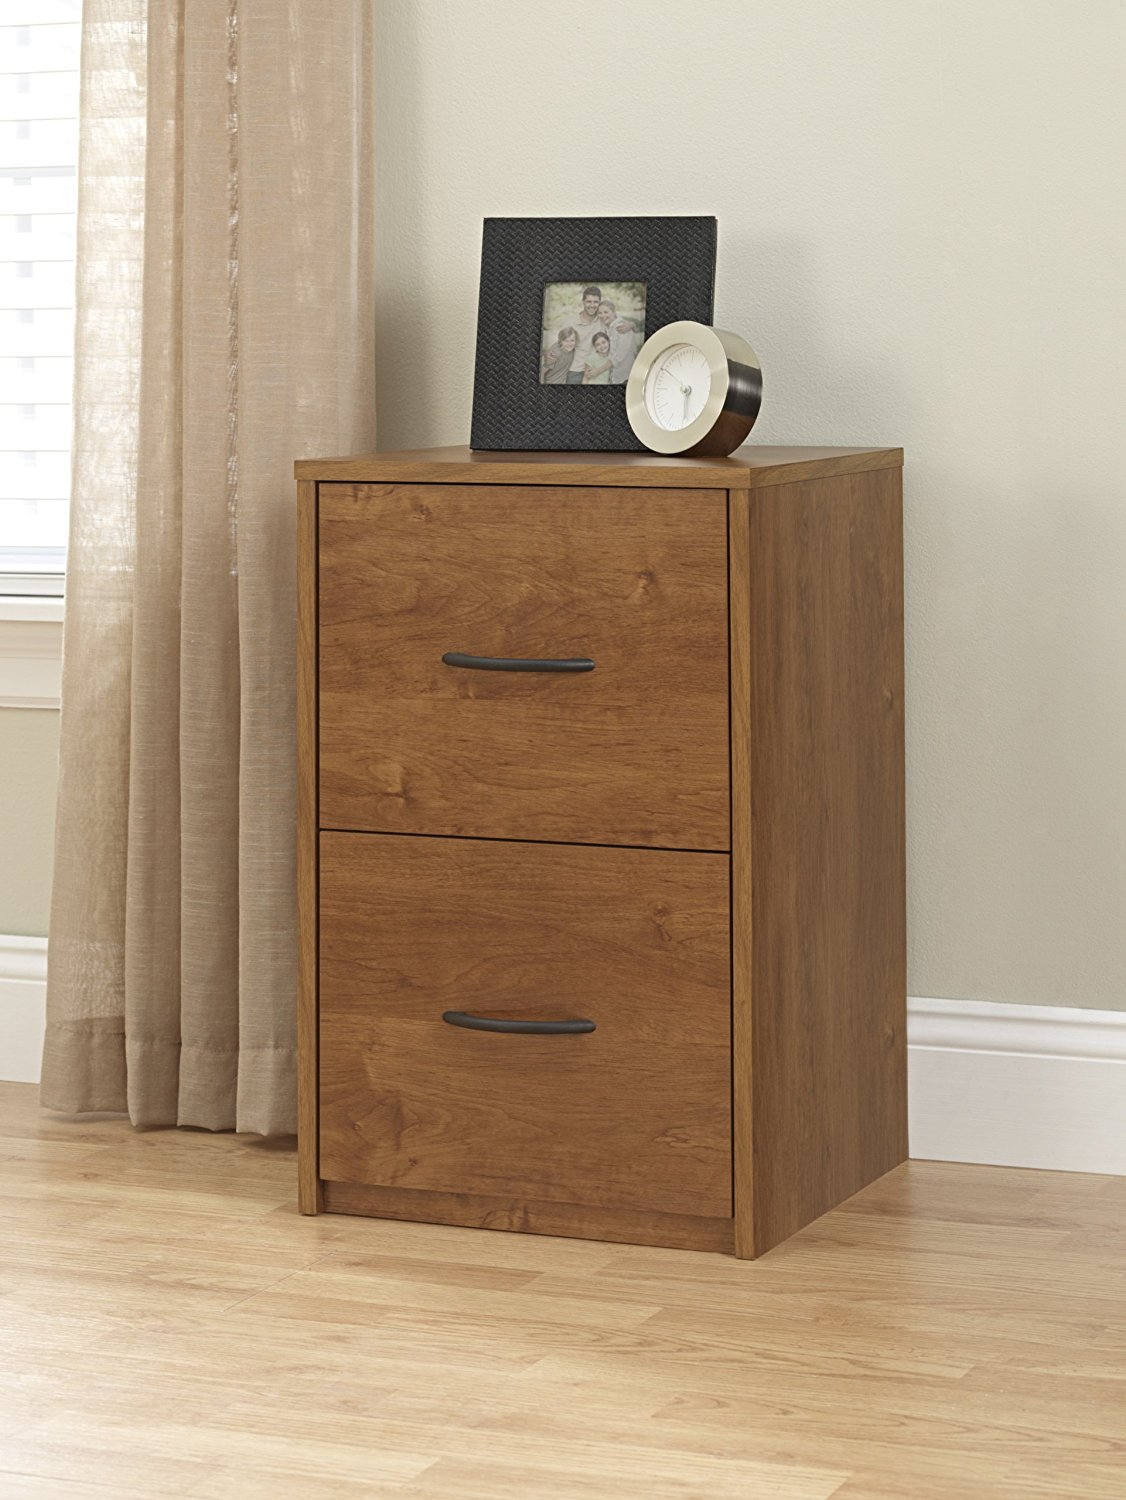 Top 20 Wooden File Cabinets With Drawers with size 1126 X 1500